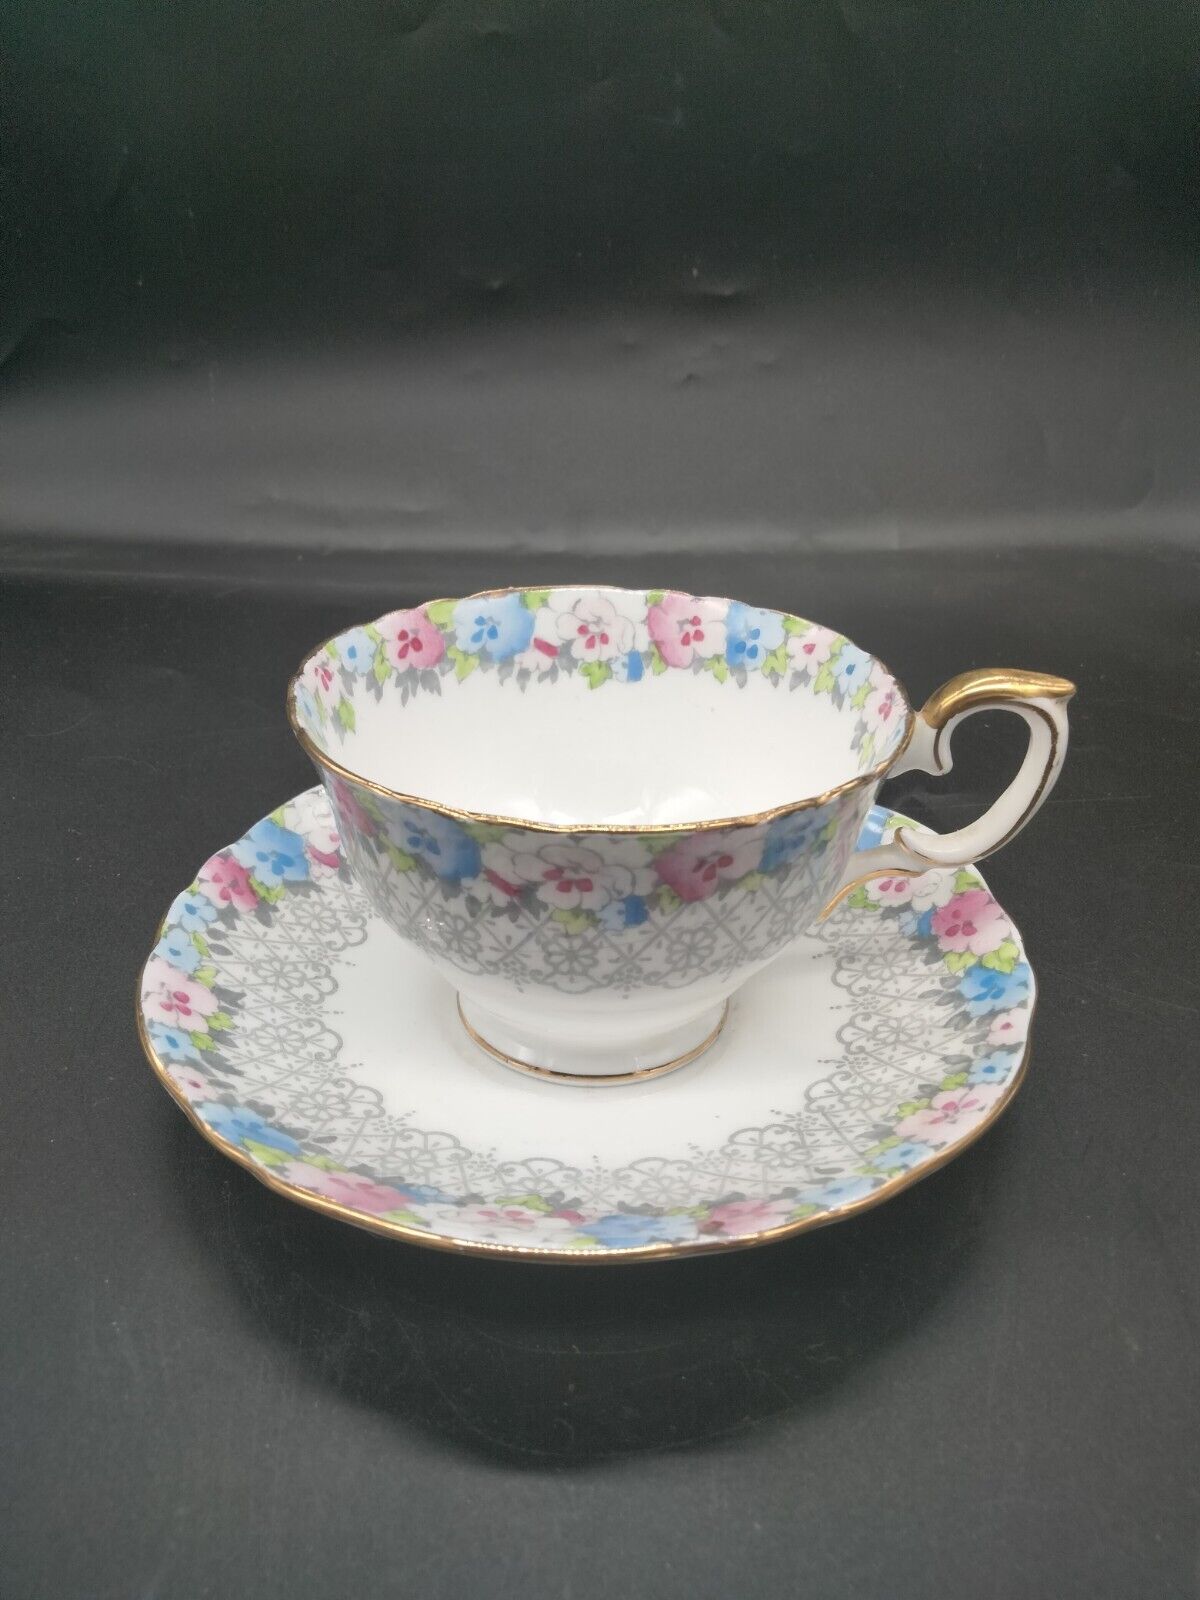 Crown Staffordshire Floral & Lace Tea Cup and Saucer Bone China Made in England